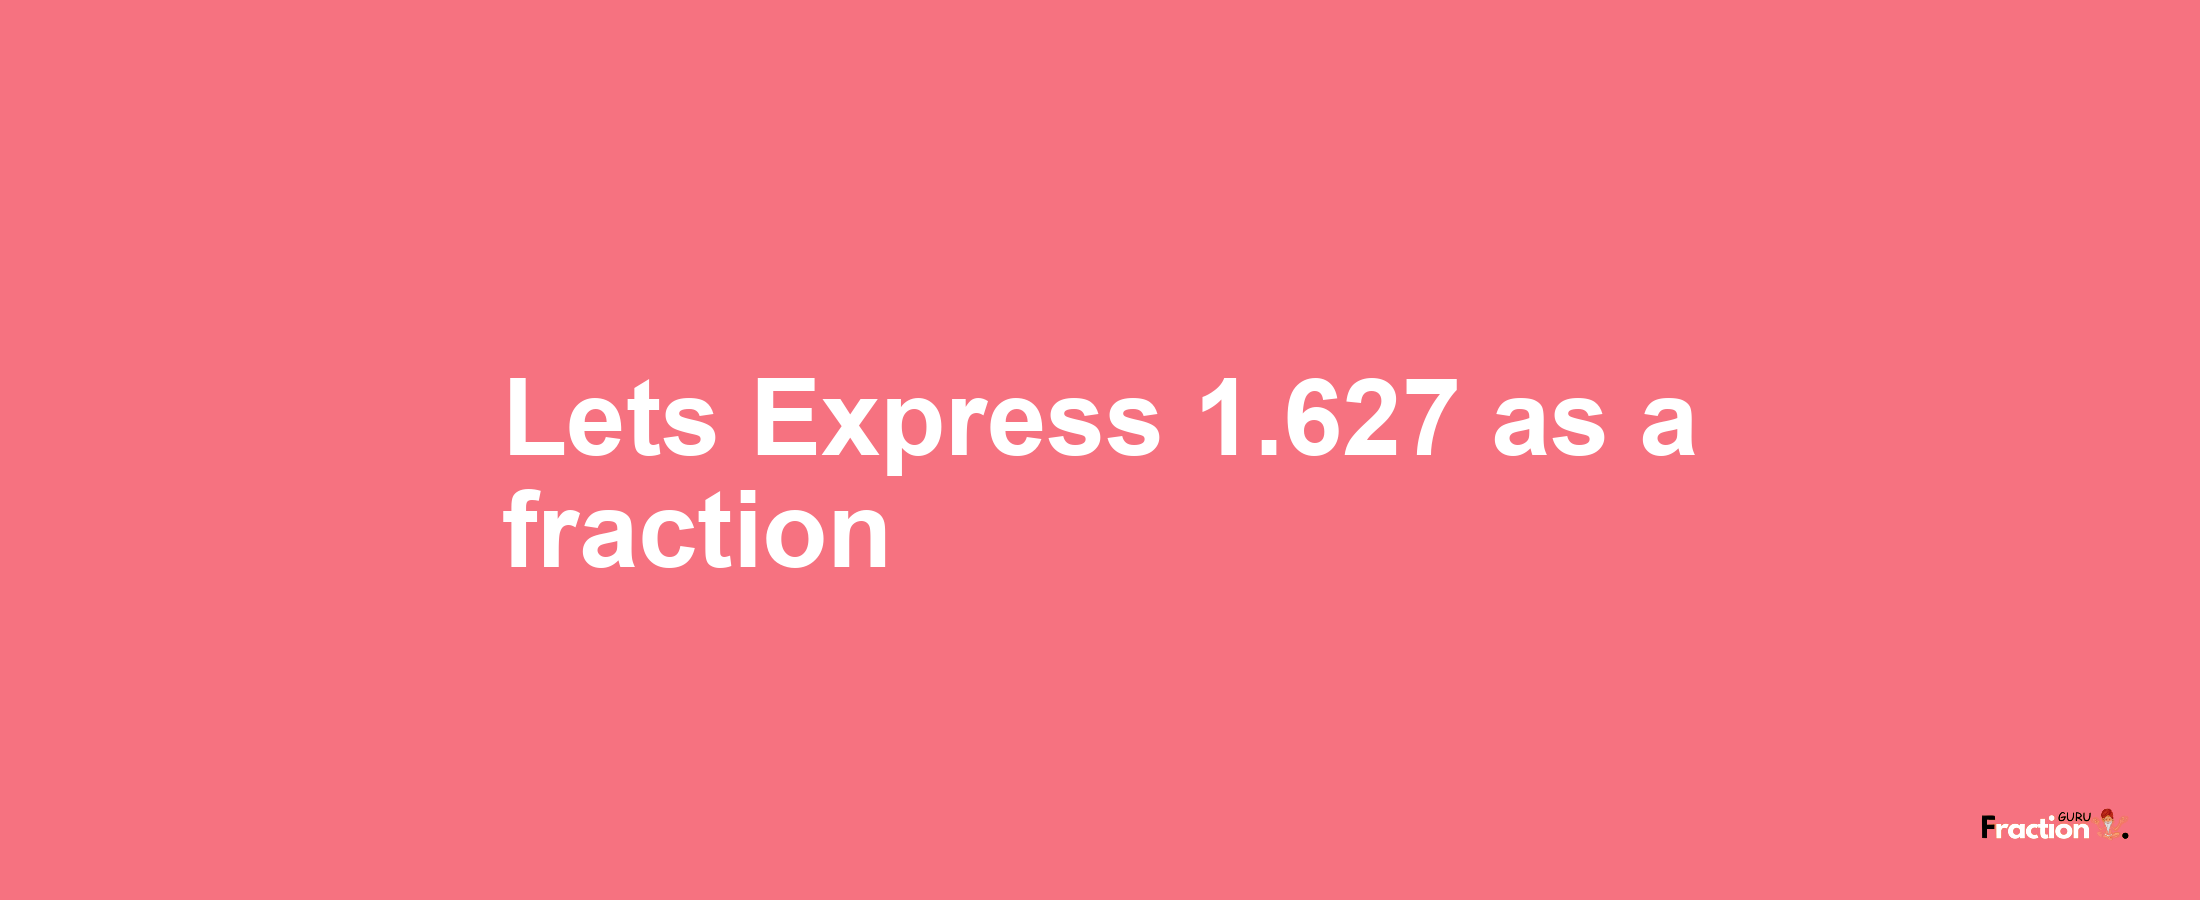 Lets Express 1.627 as afraction